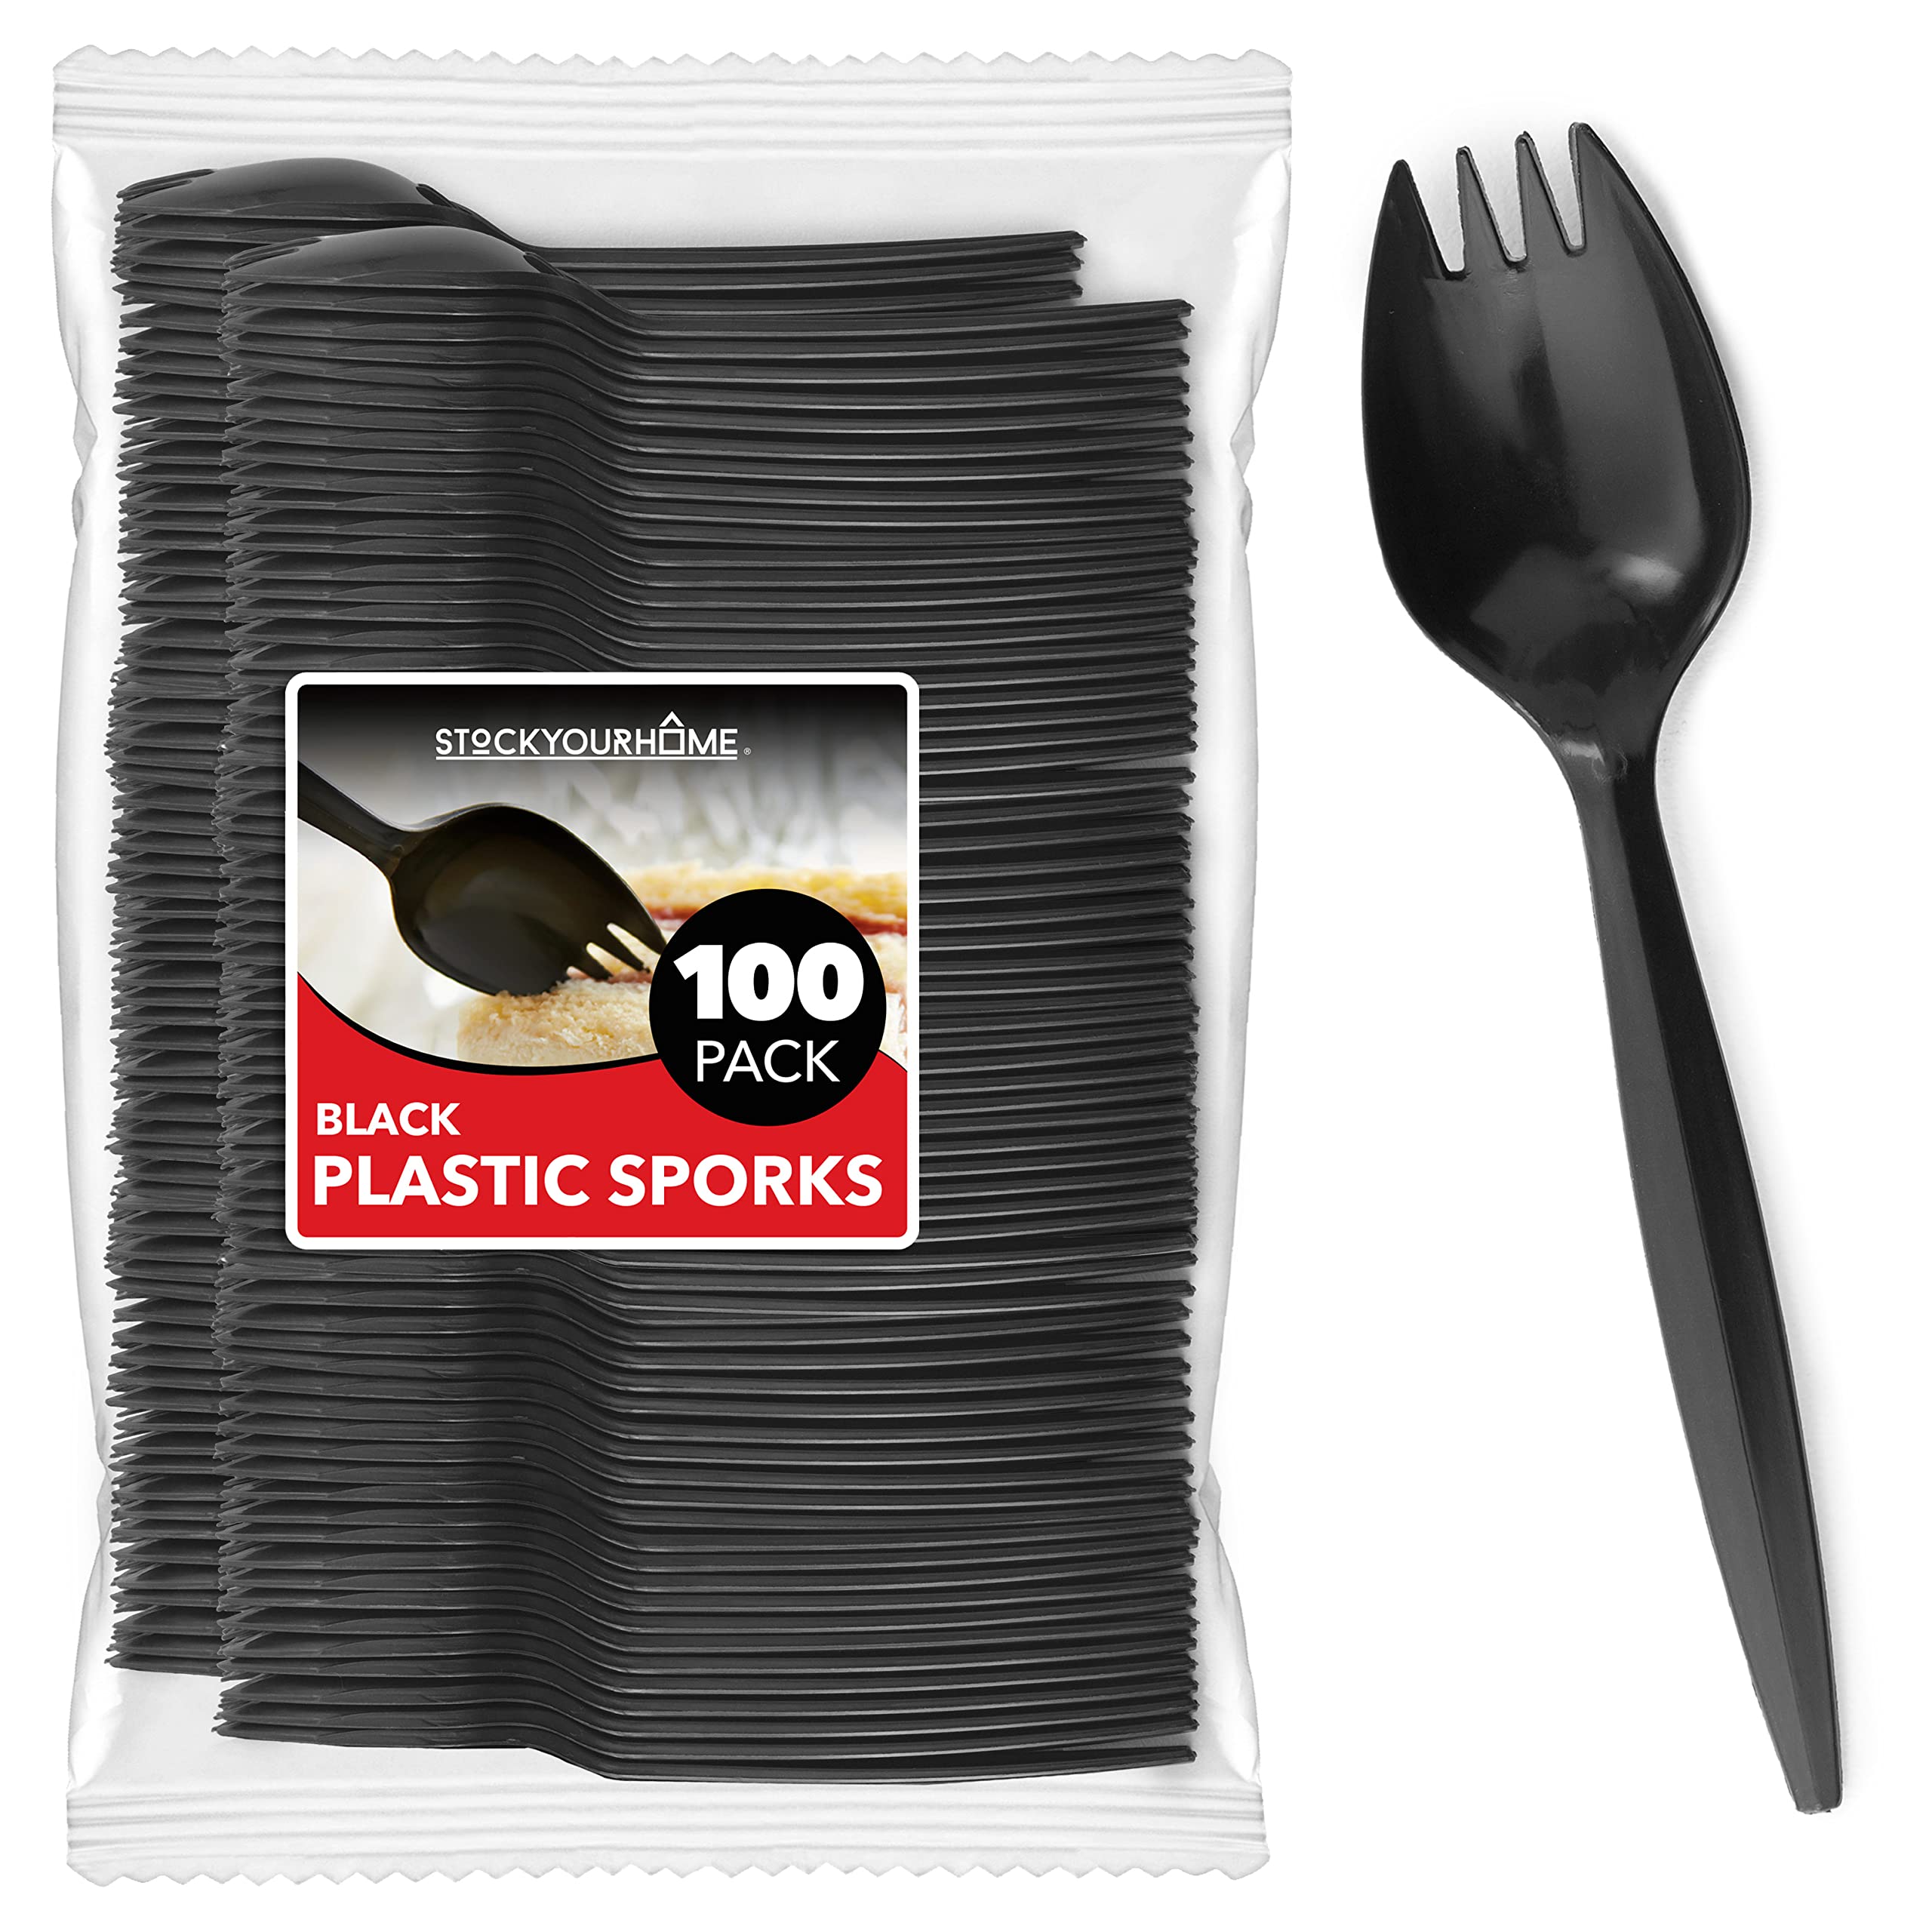 100 3.5 Disposable Sporks, Clear Plastic Sporks - Fork Spoon 2 in 1  utensils Perfect for Travel, Sc…See more 100 3.5 Disposable Sporks, Clear